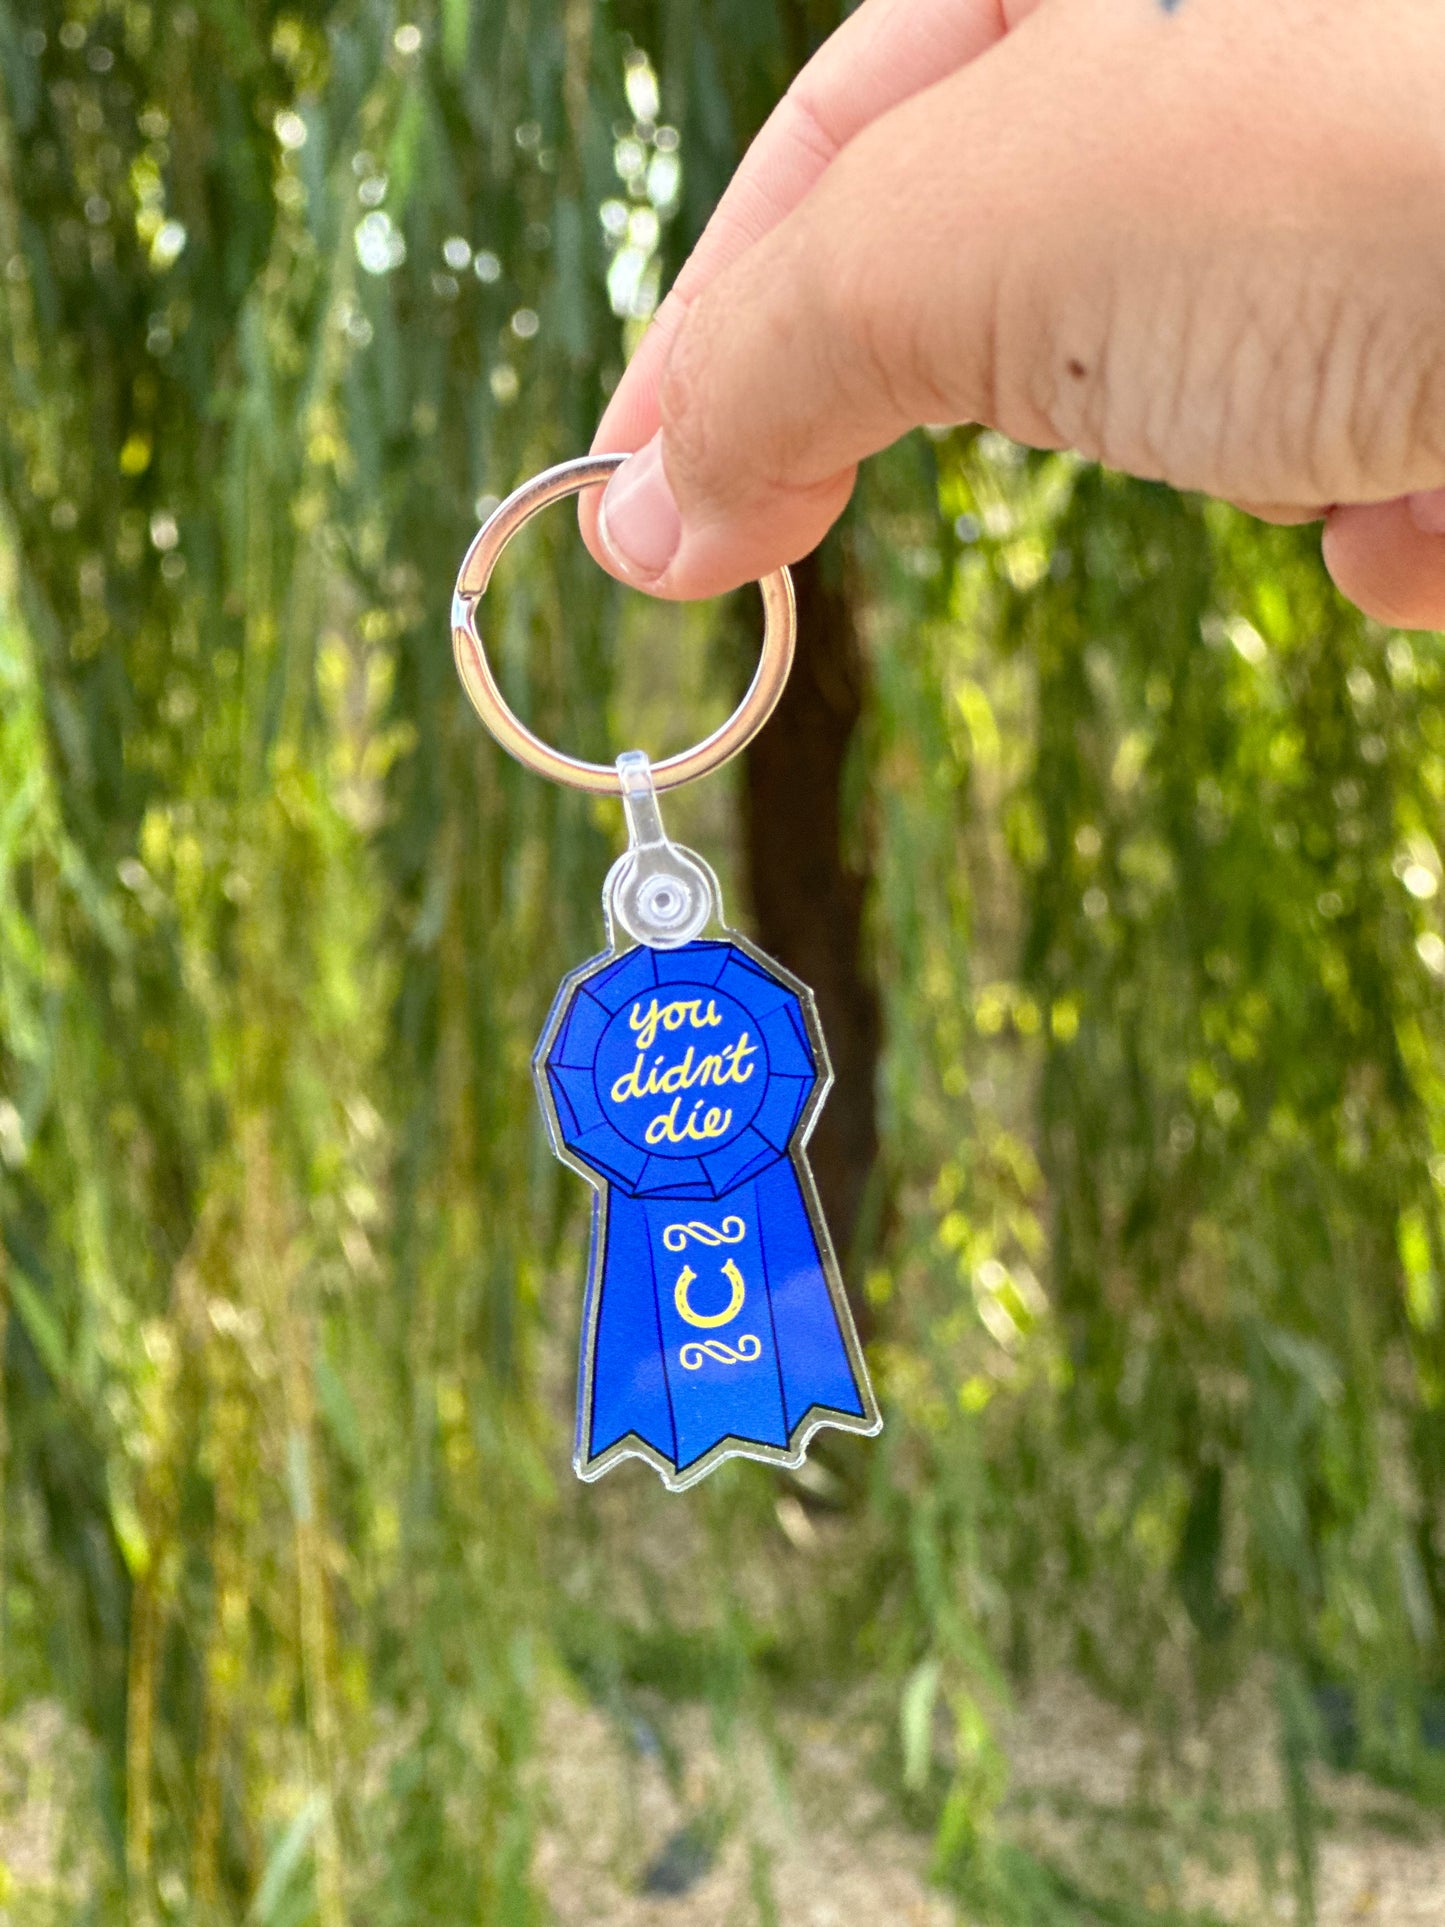 blue horse show ribbon keychain with words "you didn't die" written at top and a horseshoe at the bottom